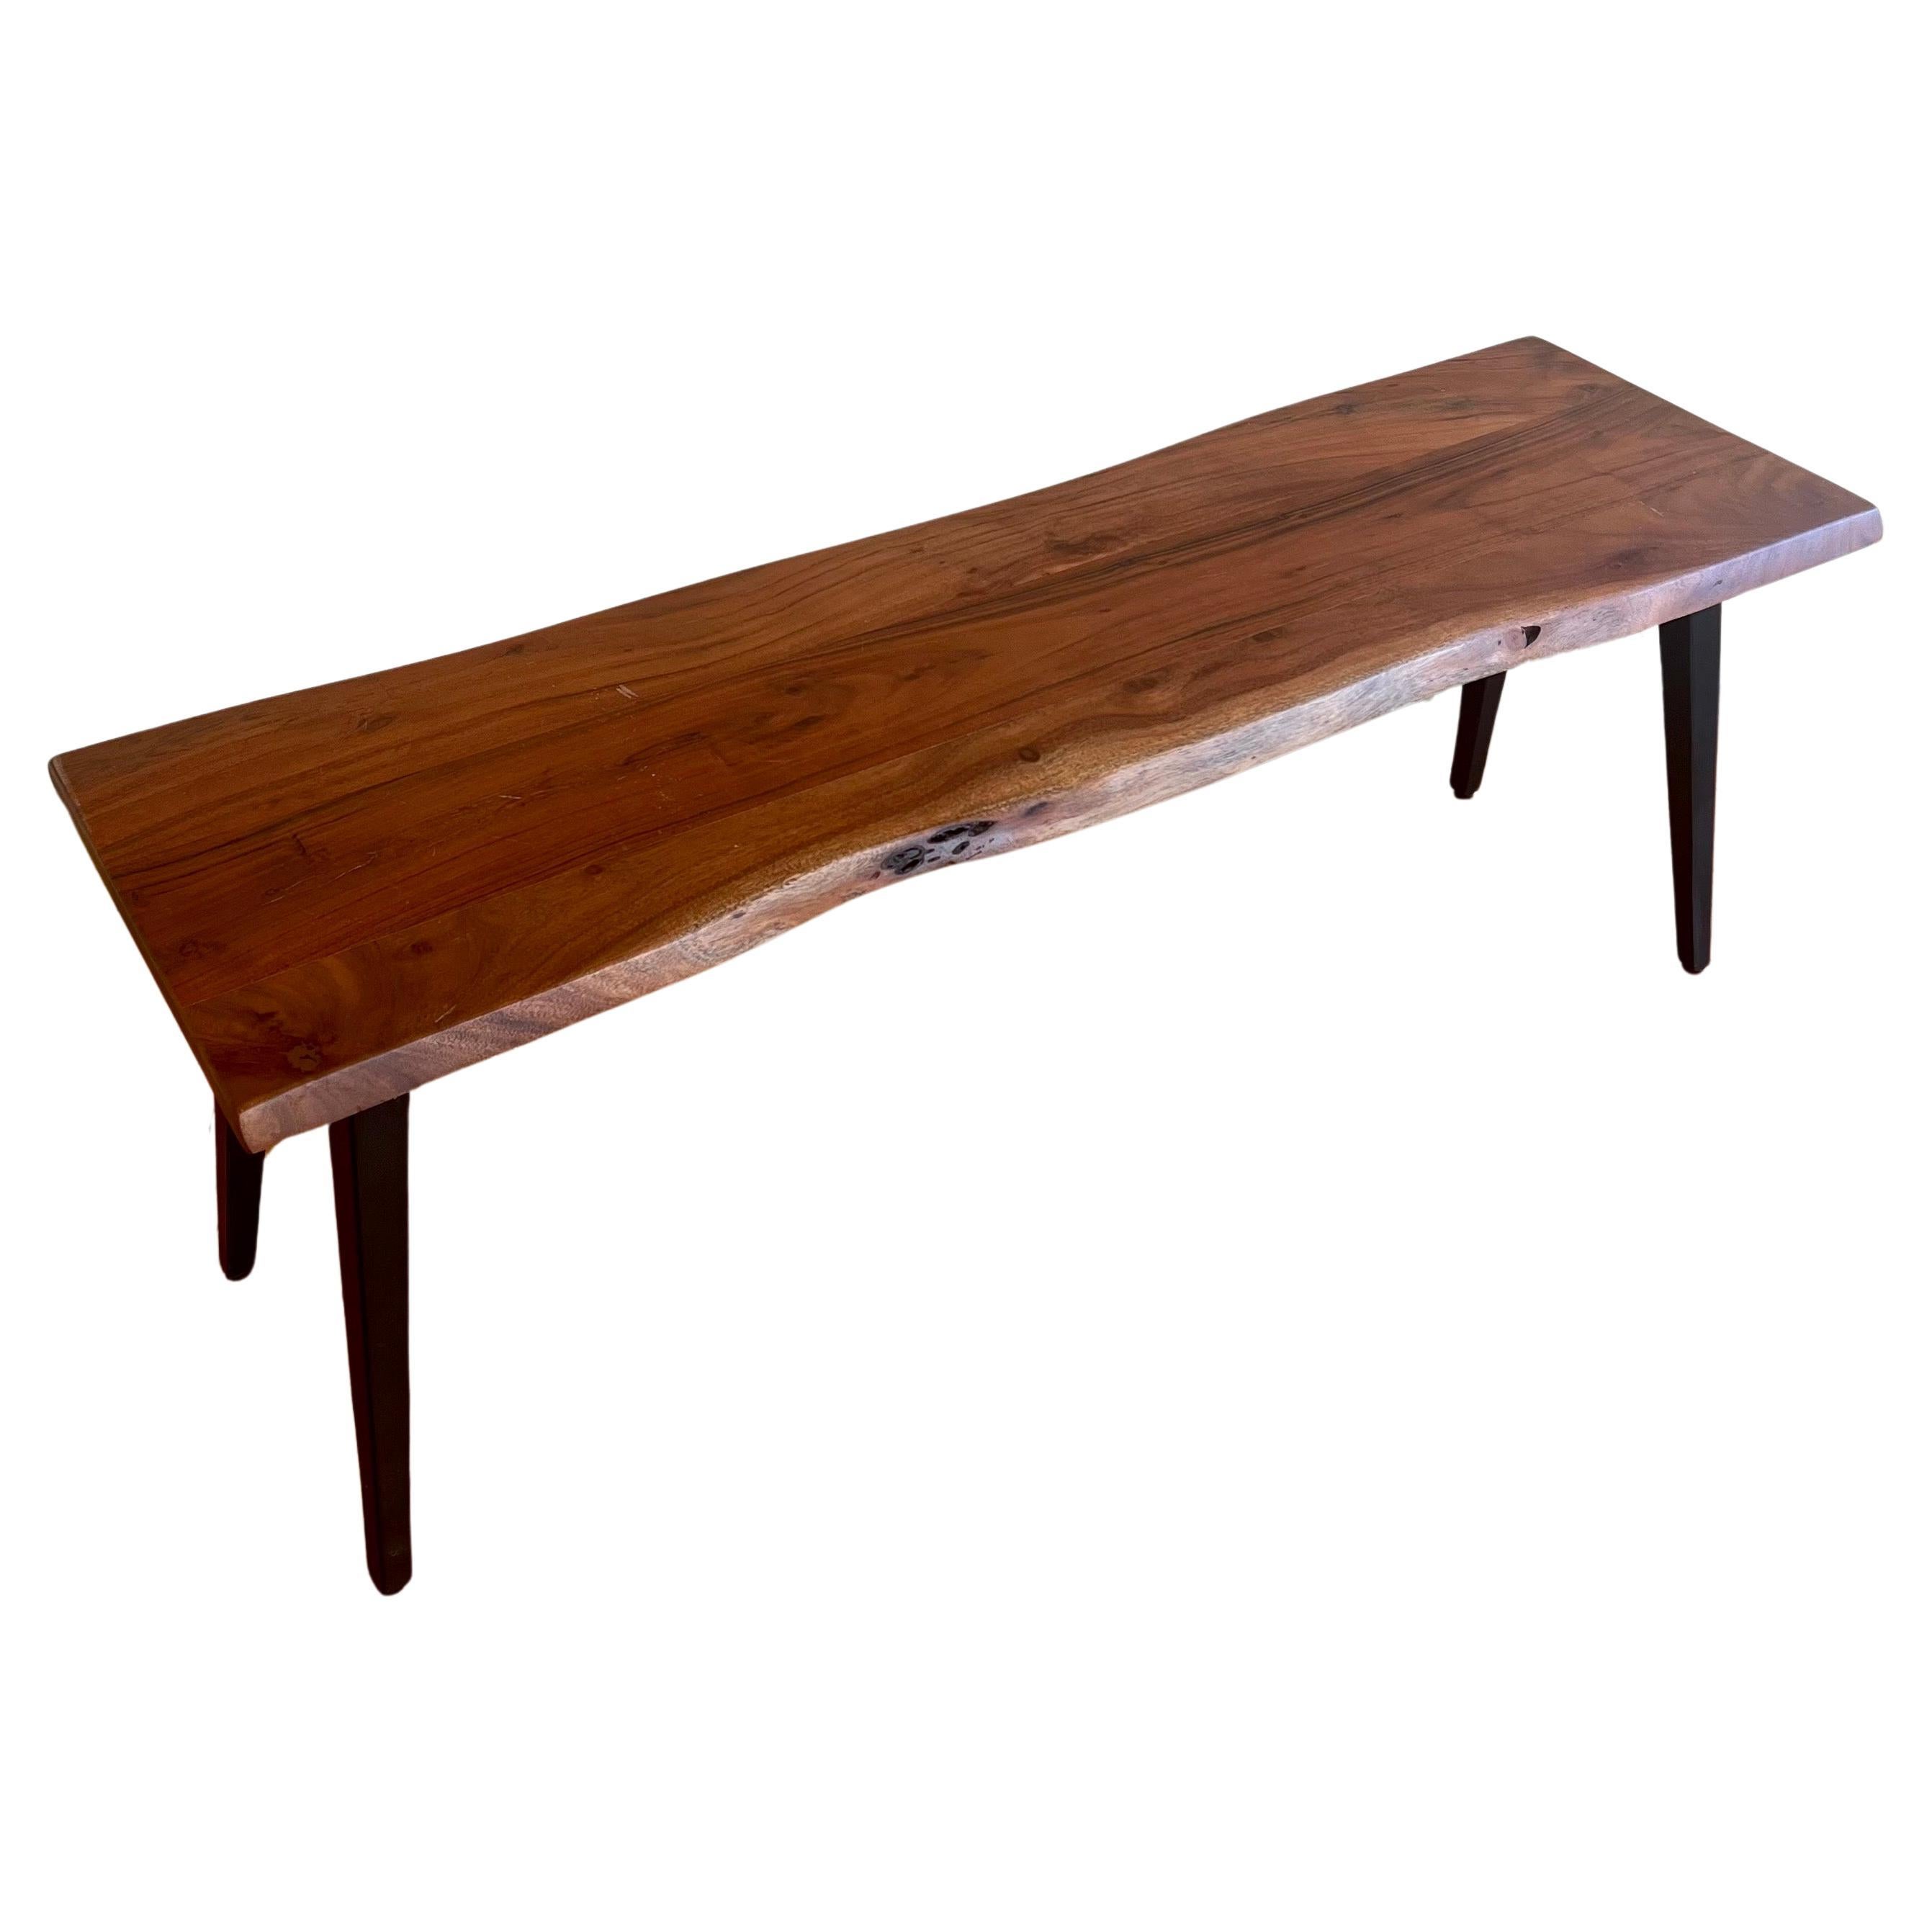 American Solid Mahogany Live Edge Wood Coffee Table Bench 